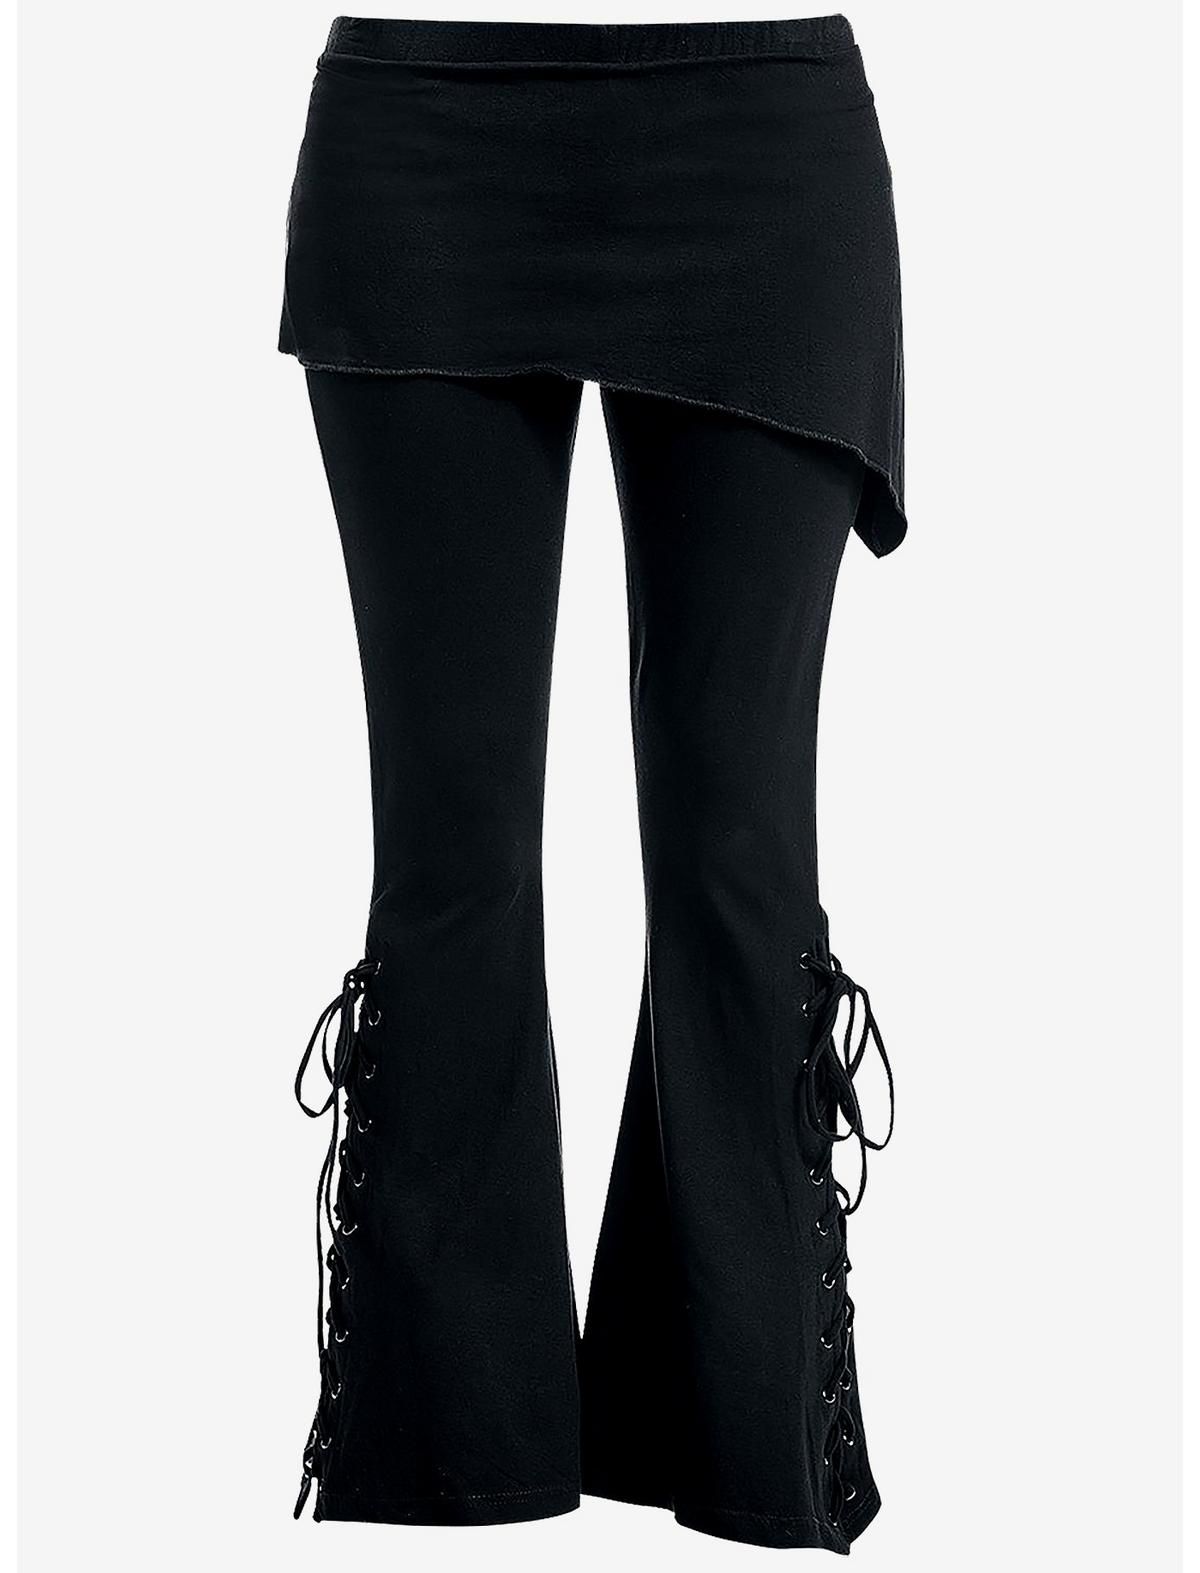 Lace Up Flare Leggings | Hot Topic | Hot Topic